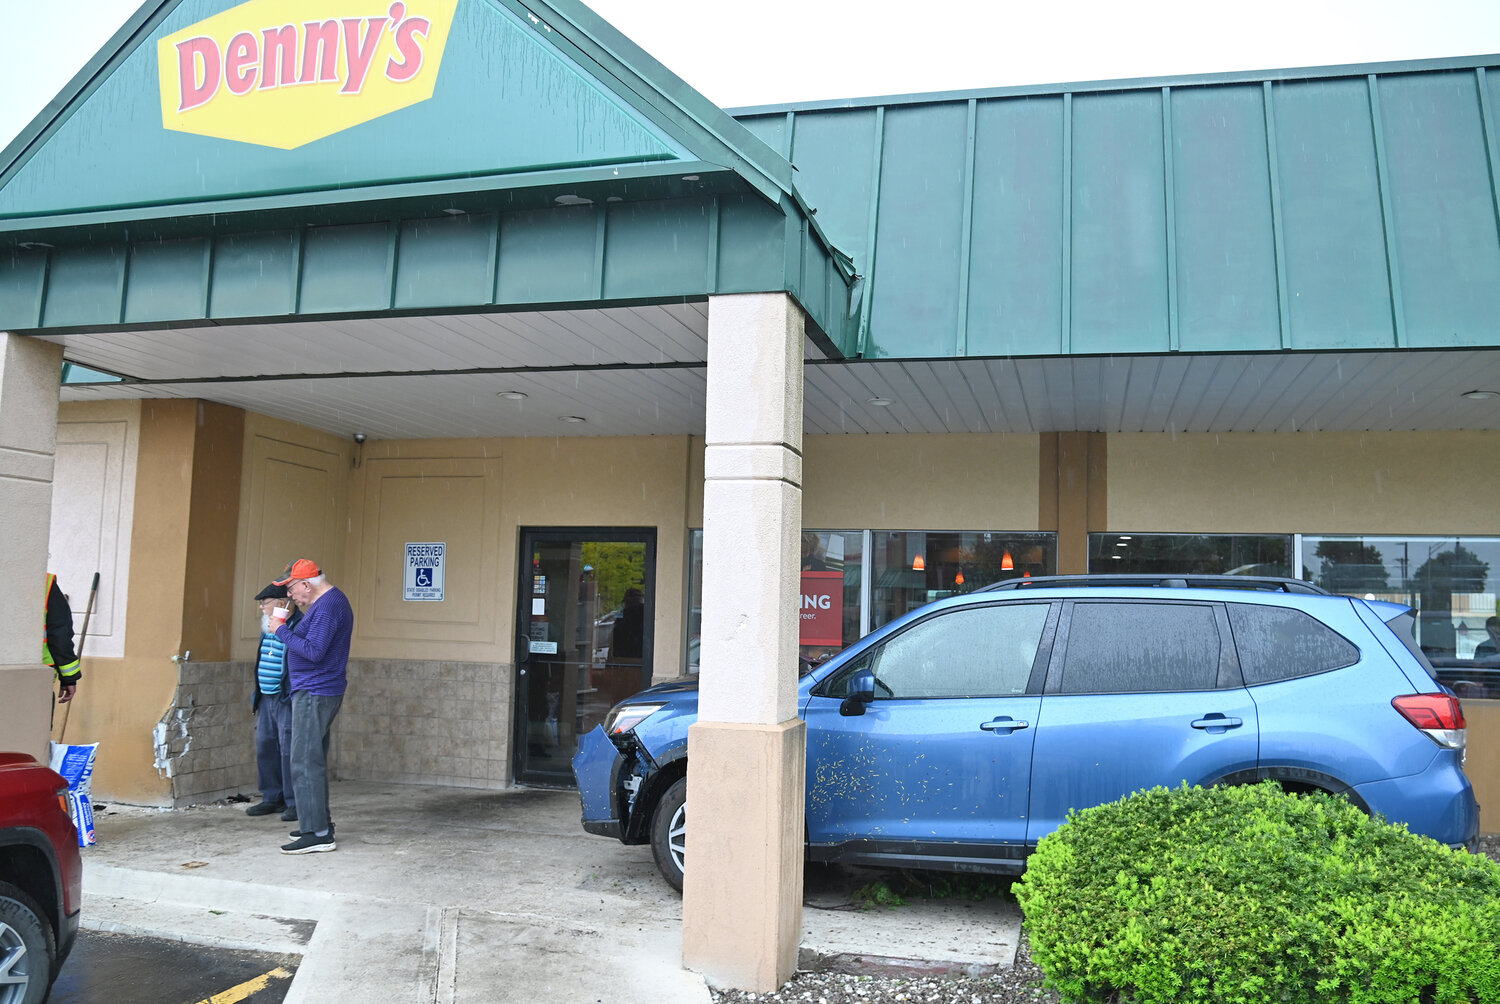 No one was injured when this SUV crashed into the masonry outside the Denny's restaurant on South James Street in Rome shortly after 2 p.m. Wednesday, according to the Rome Fire Department. The Rome Police Department is investigating.